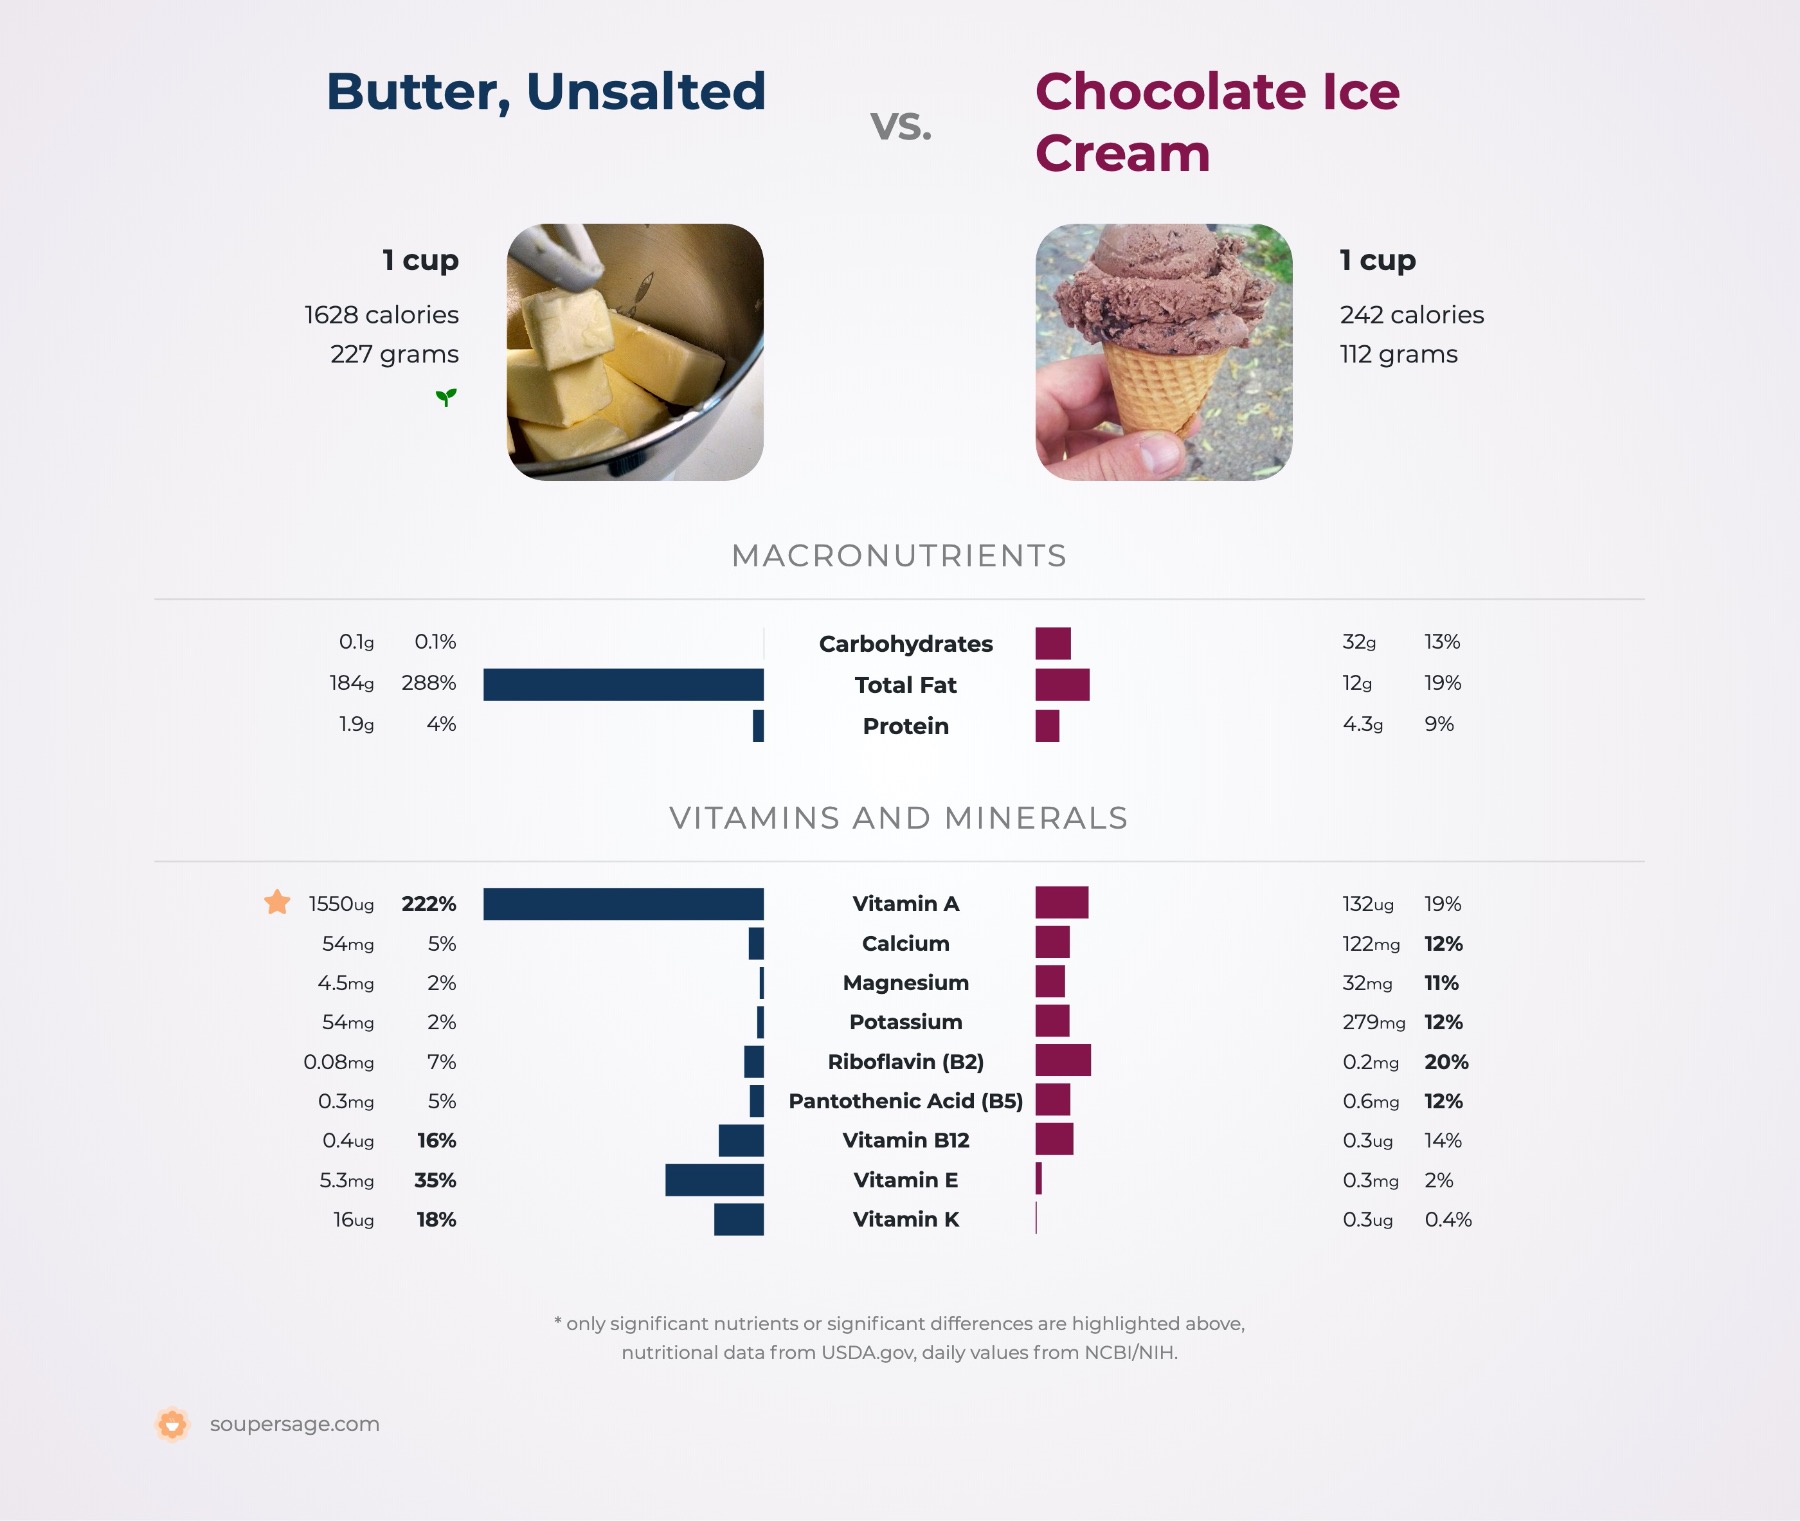 nutrition comparison of butter, unsalted vs. chocolate ice cream